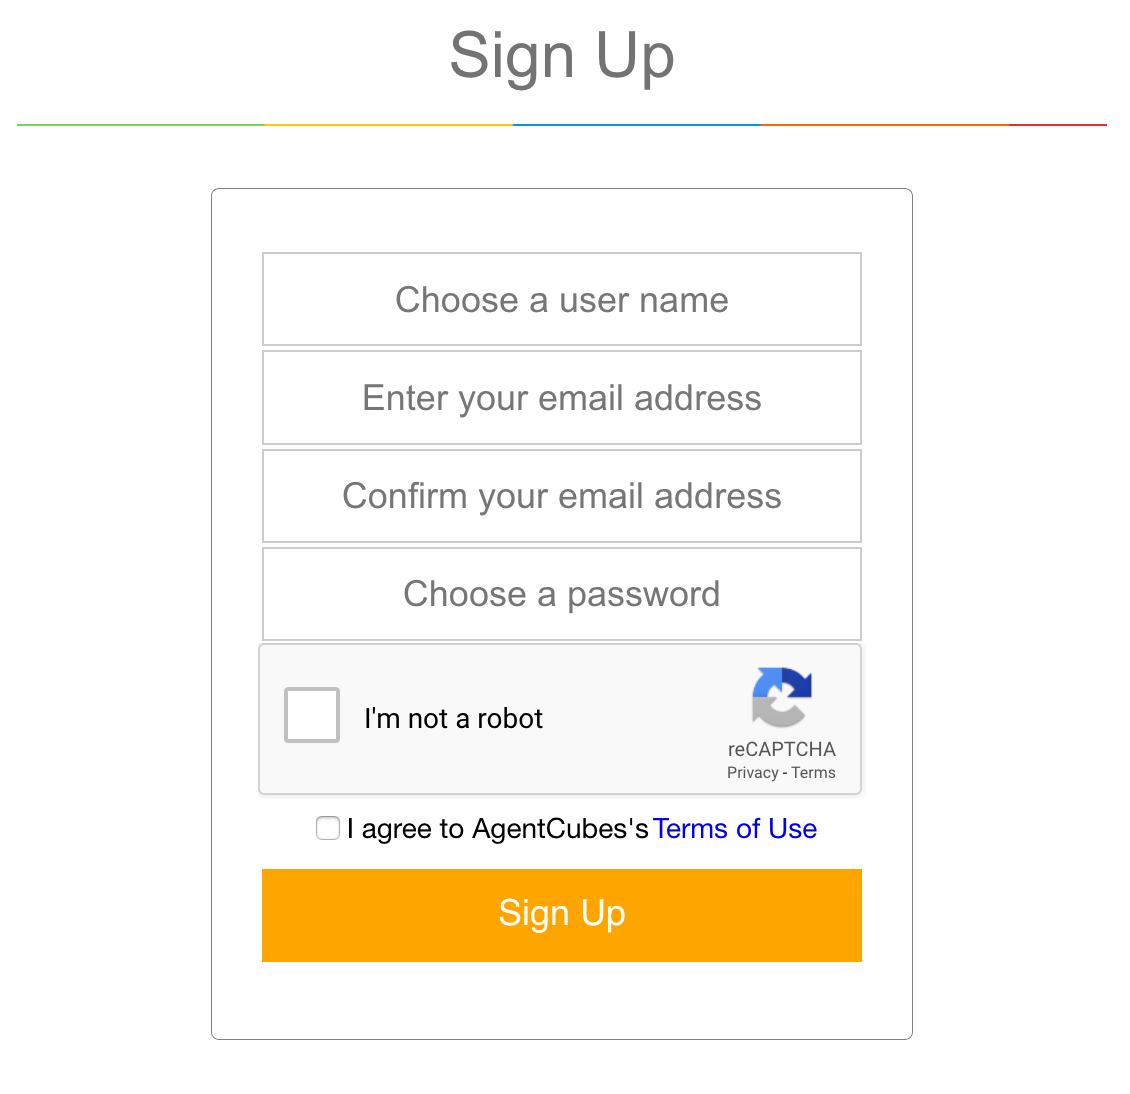 Sign up page image